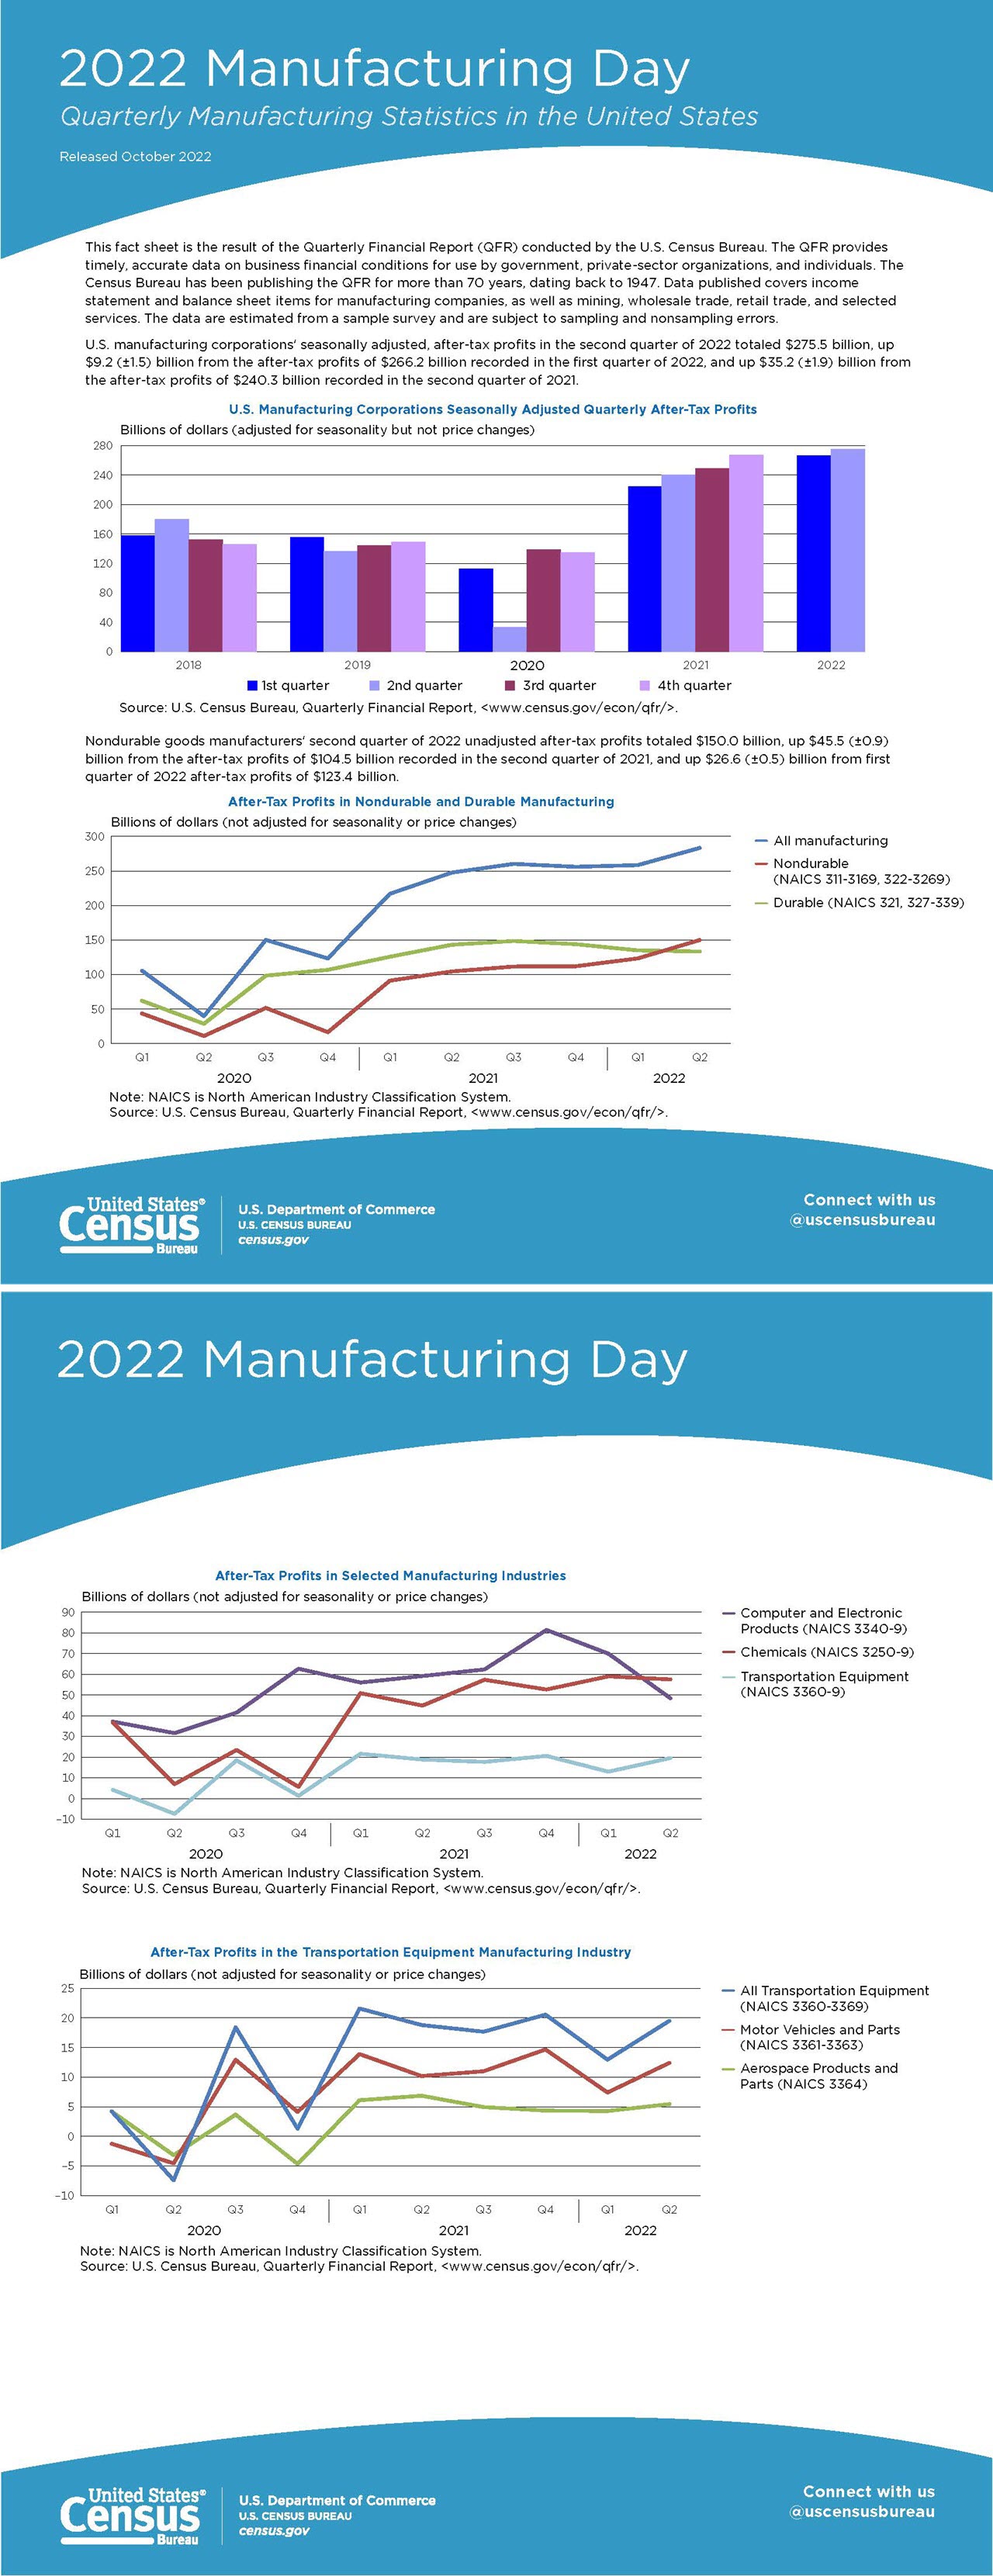 Quarterly Manufacturing Statistics in the United States